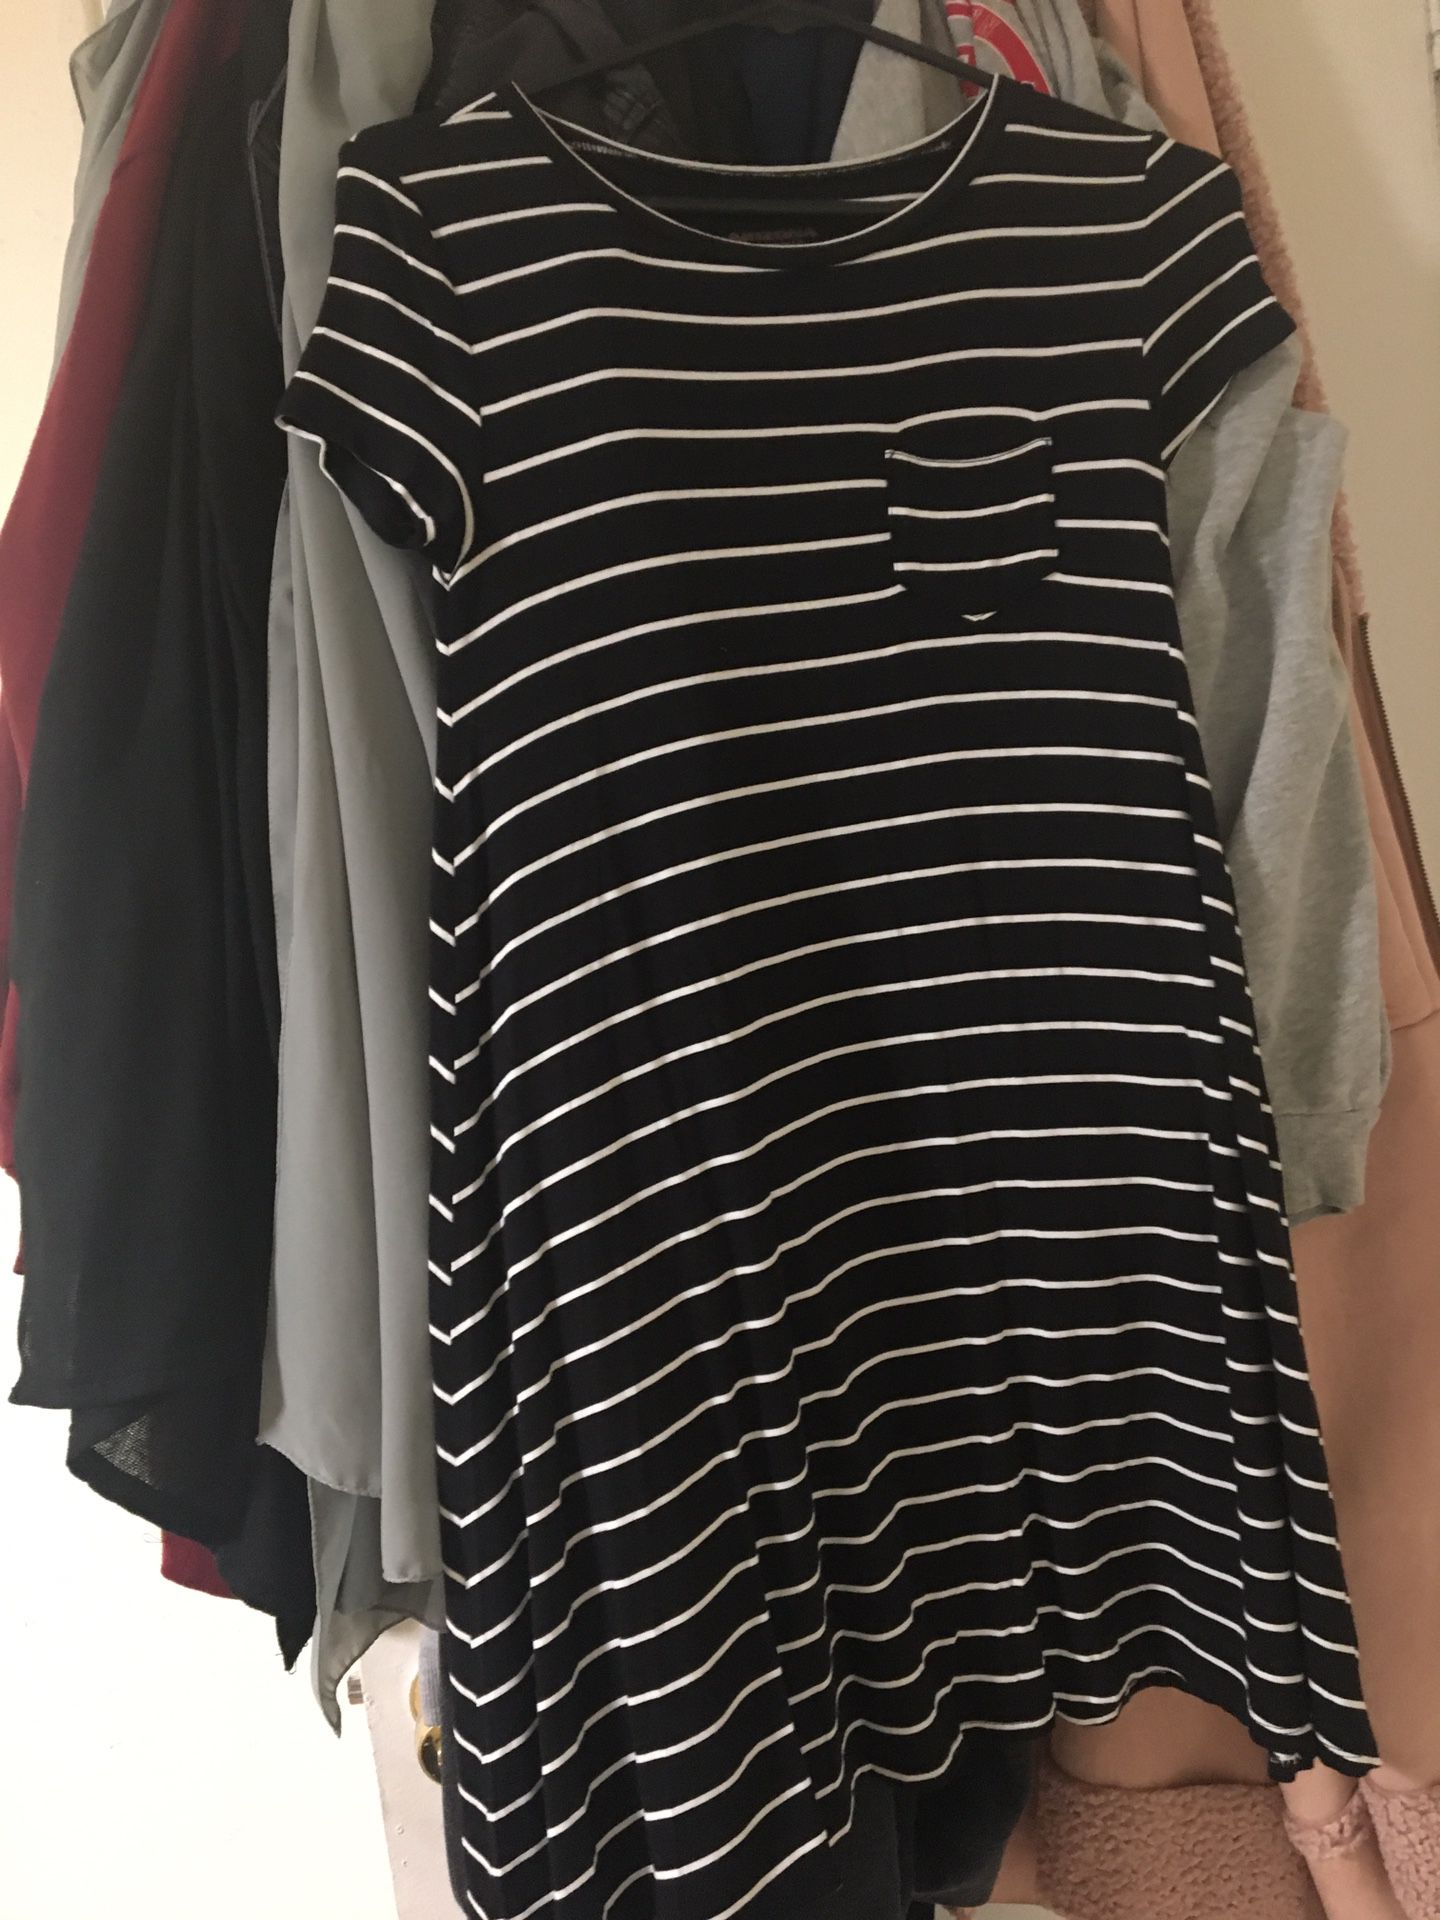 Like new short black and maroon dresses with white stripes